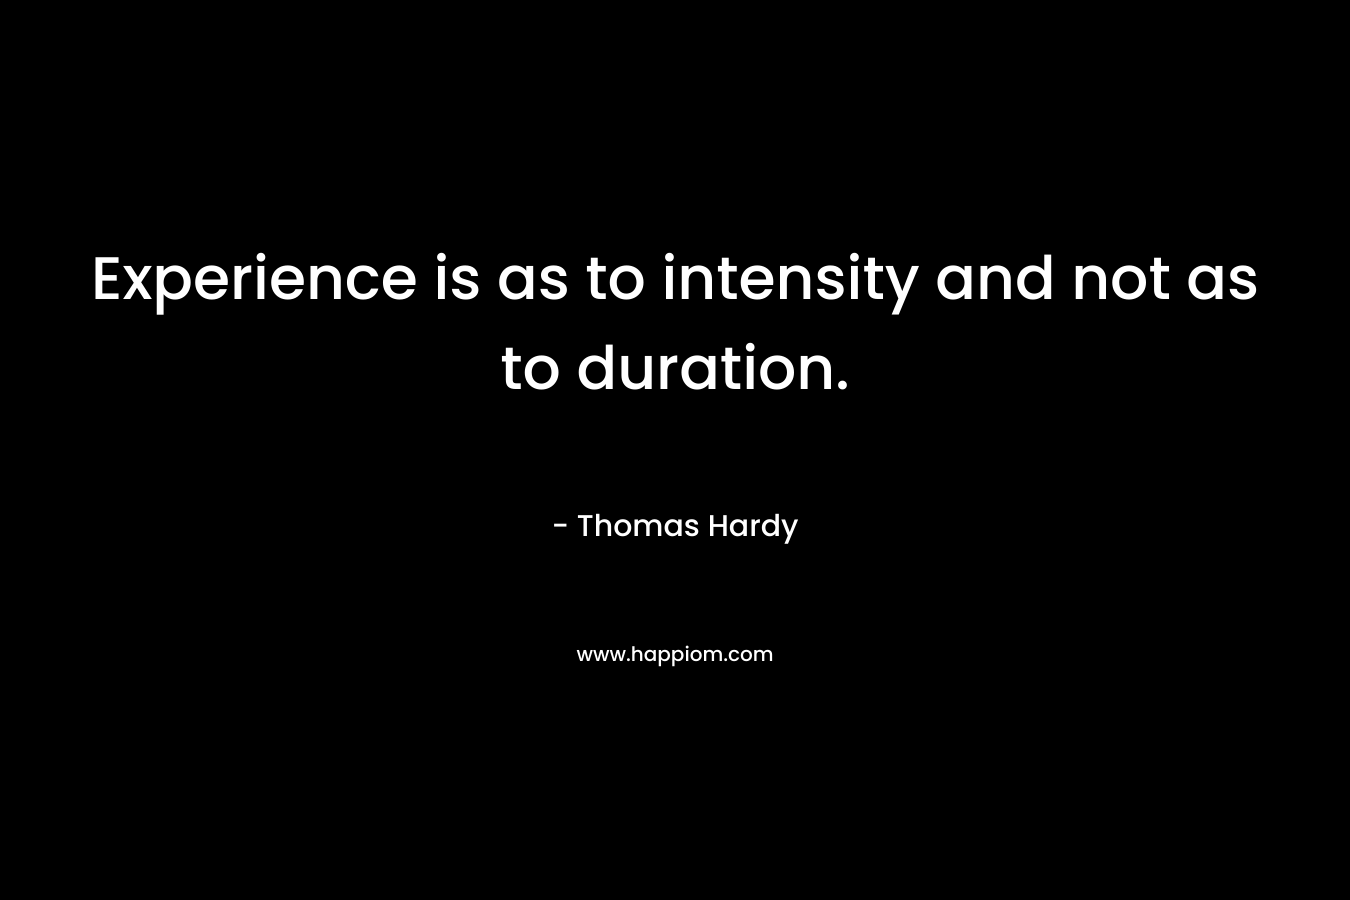 Experience is as to intensity and not as to duration. – Thomas Hardy